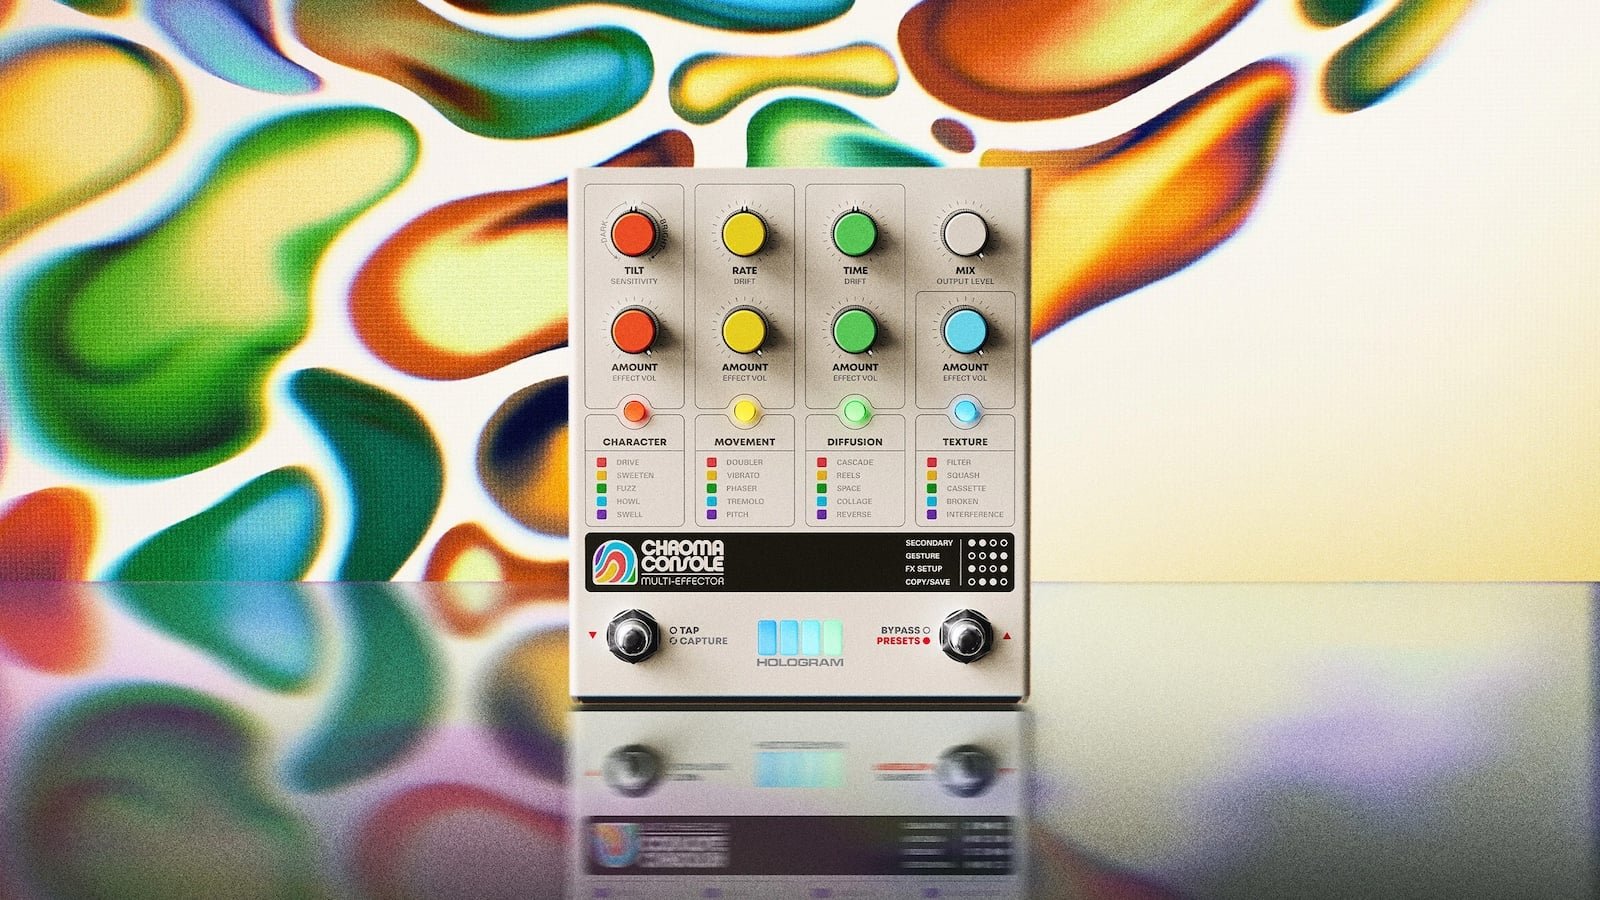 Hologram Electronics Chroma Console music pedal adds vintage audio effects to recordings